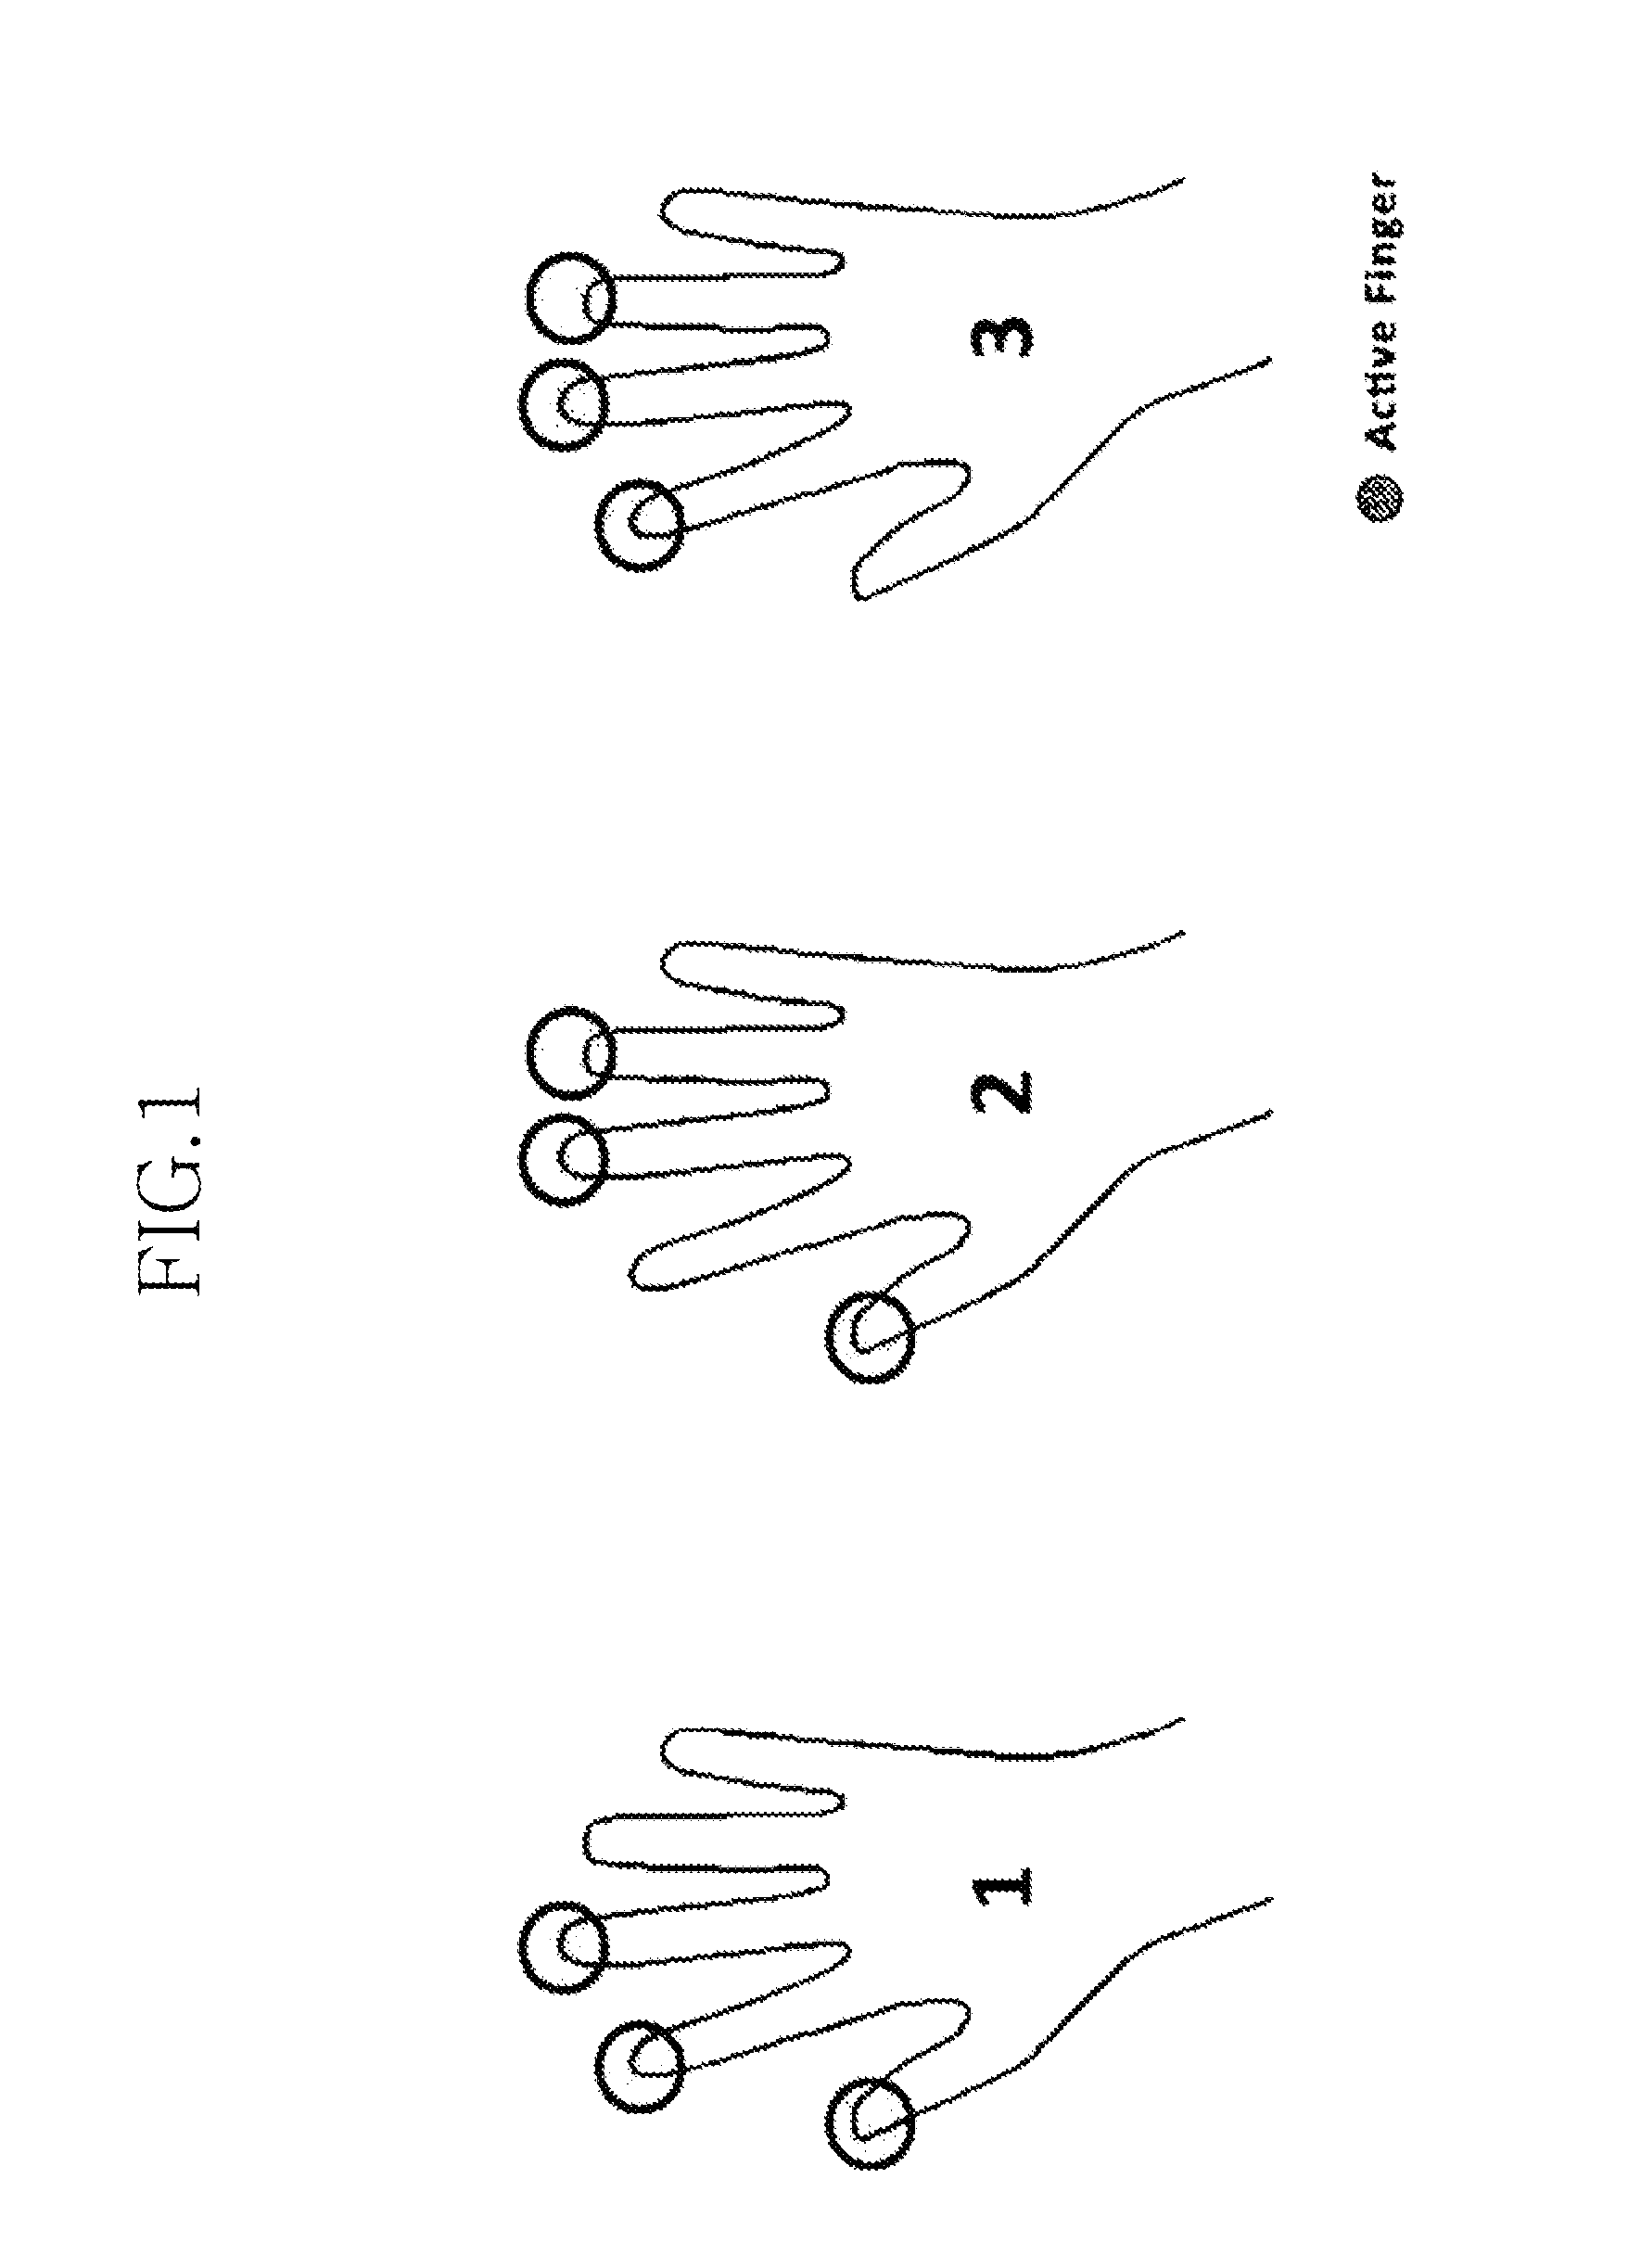 Image-color-correcting method using a multitouch screen